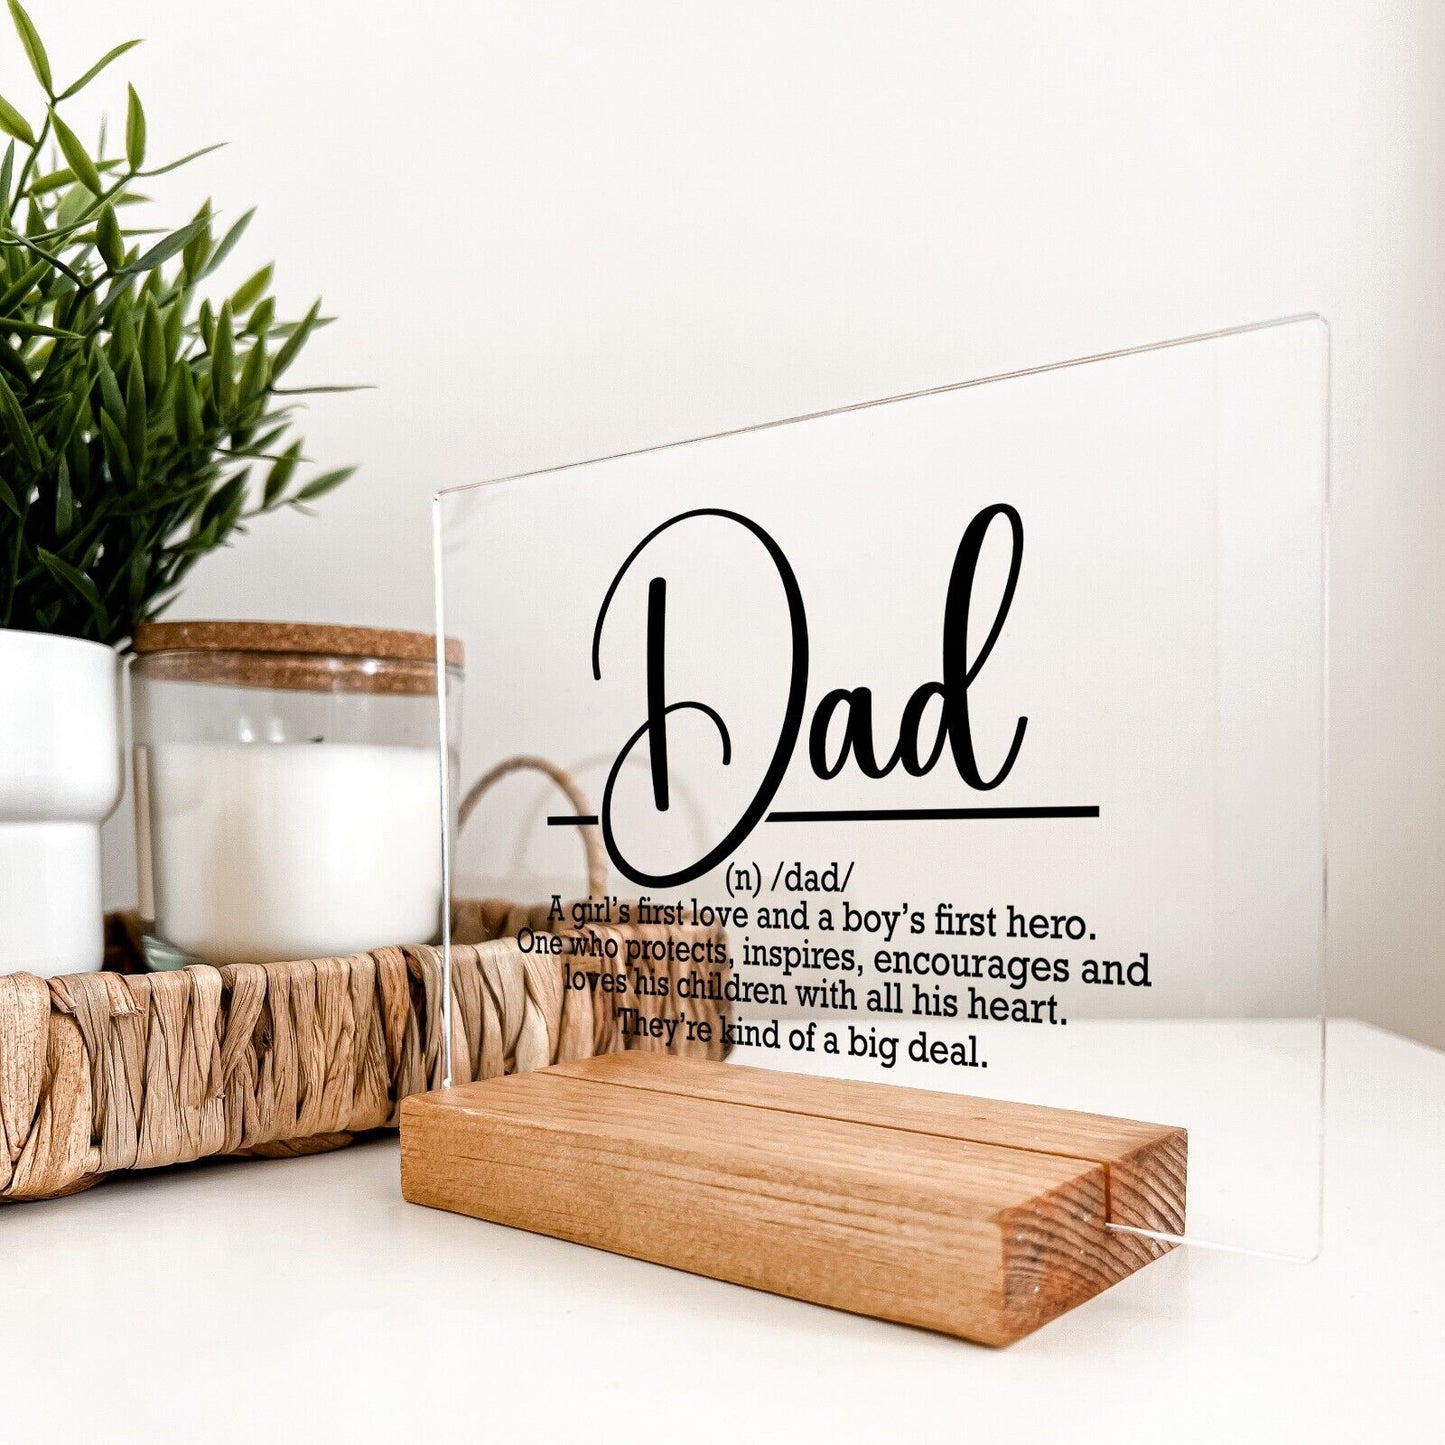 Personalized Wood Base Desk Table Stand Father's Day Meaning of Dad Gift